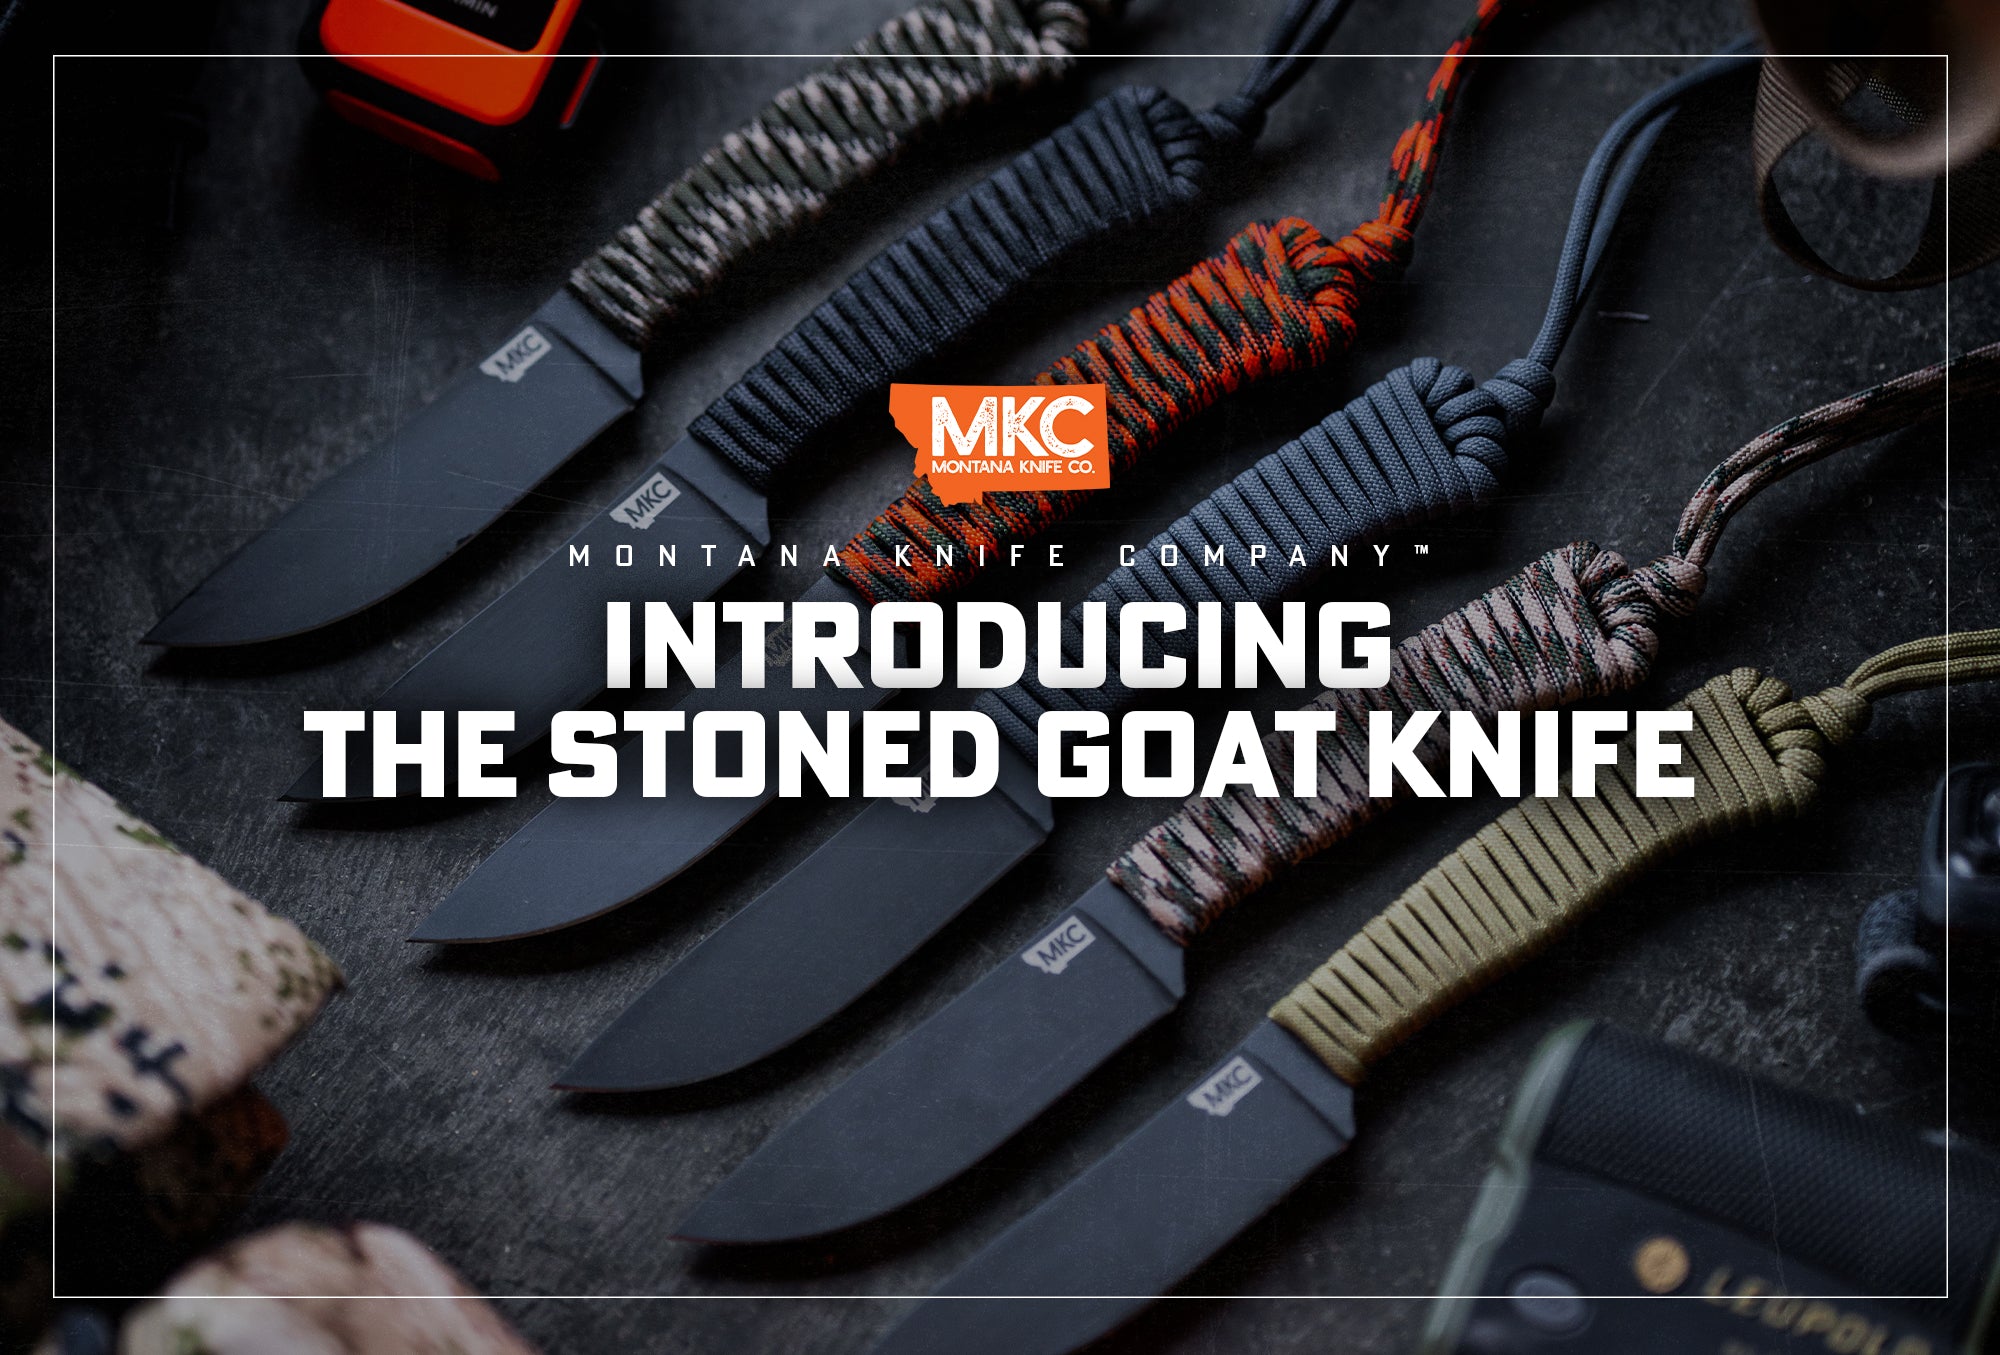 Introducing the Stoned Goat Knife